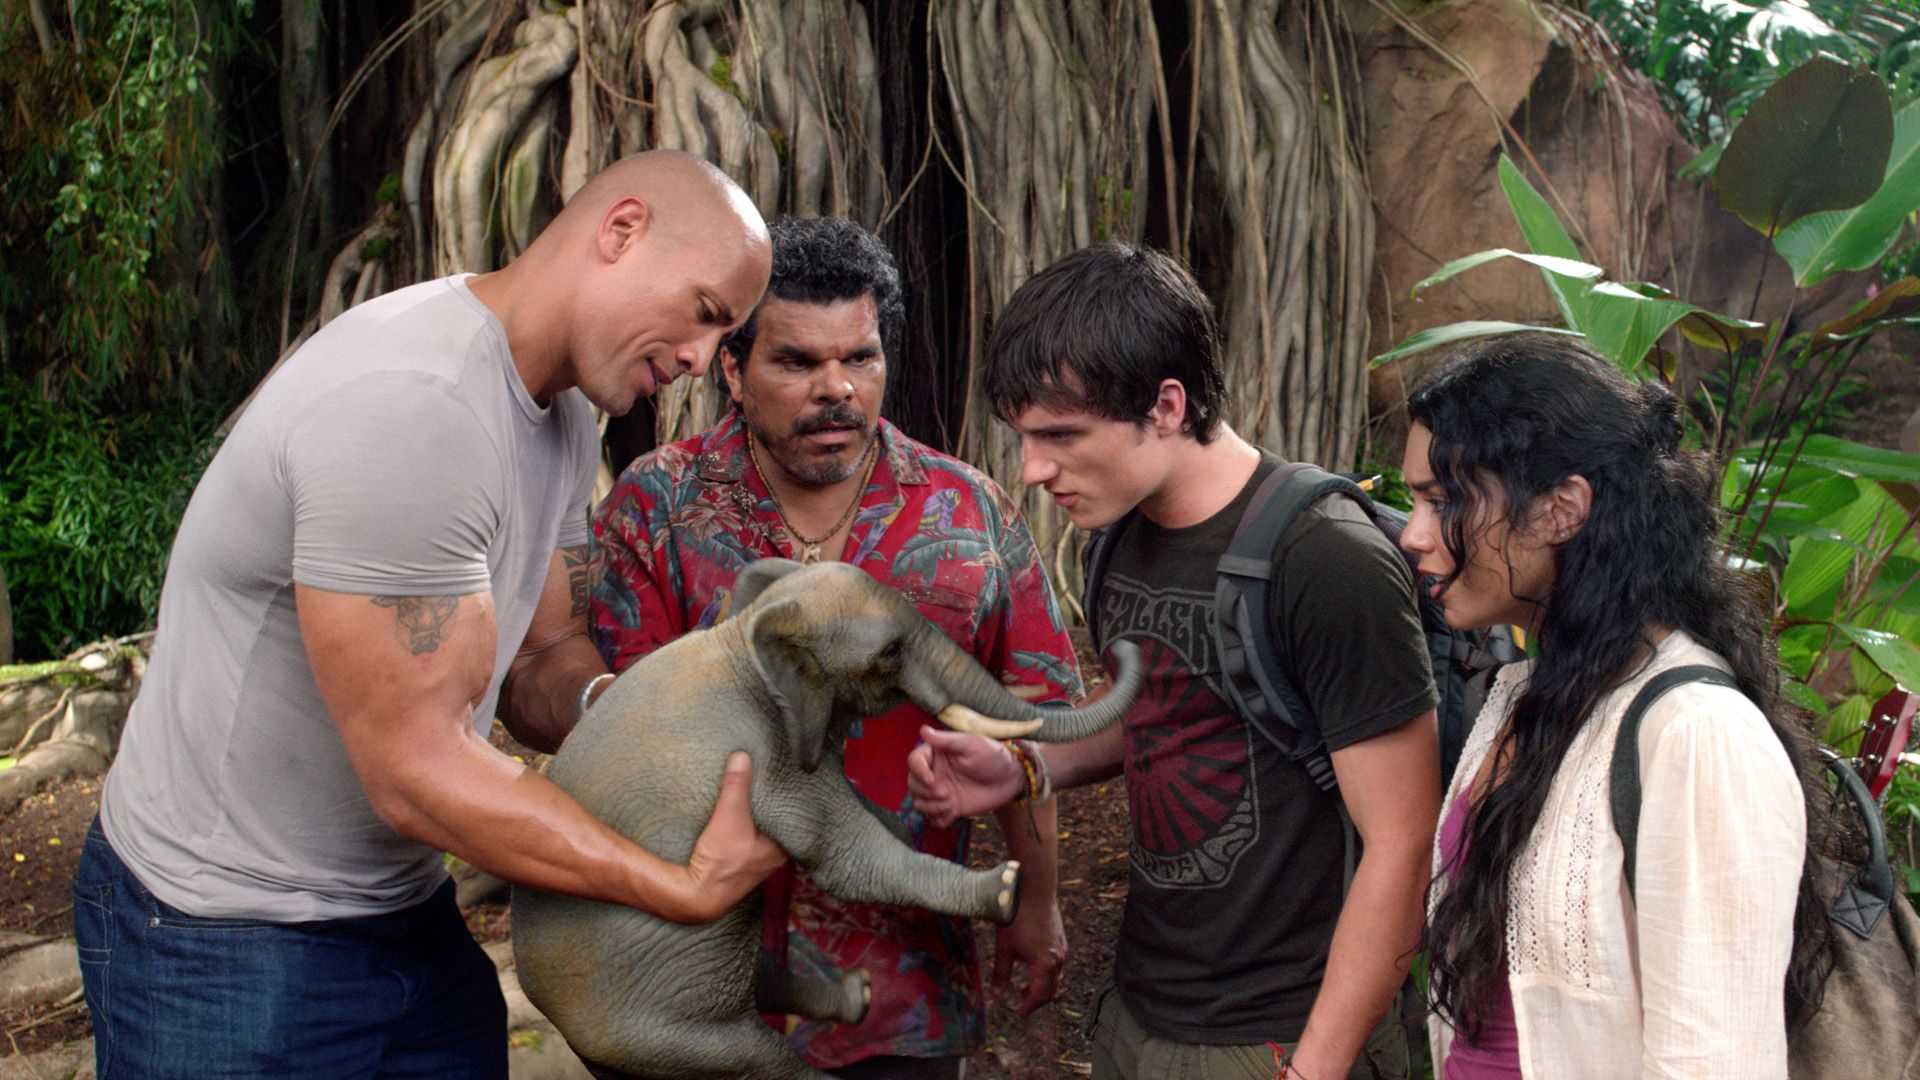 Dwayne Johnson Journeys to 'The Mysterious Island' Row Features